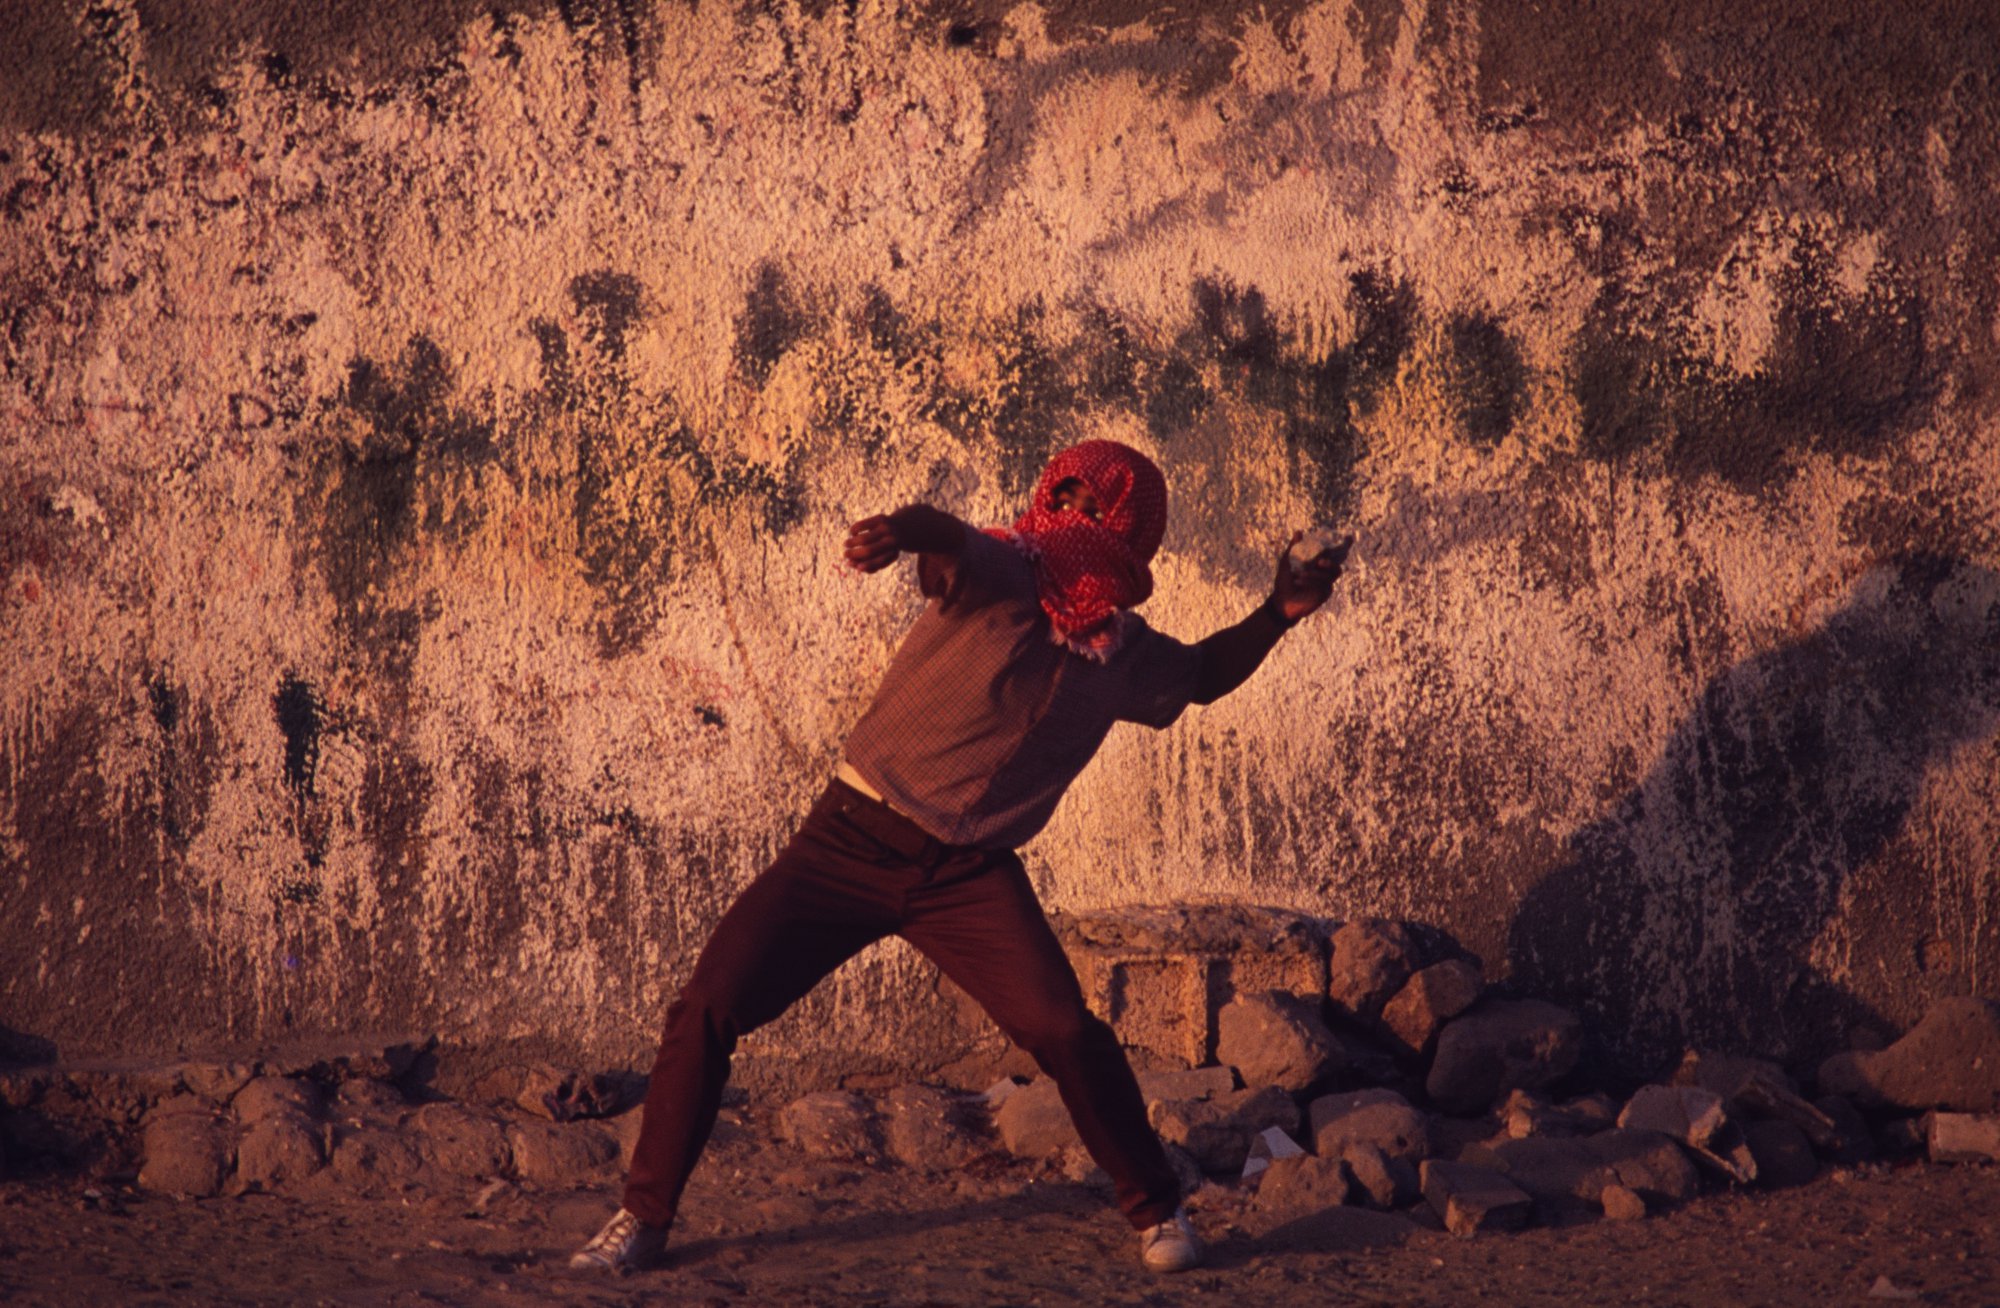  A member of the PLO hurls a rock (during the First Intifada) at Israeli Army soldiers in the Gaza Strip. 1992 